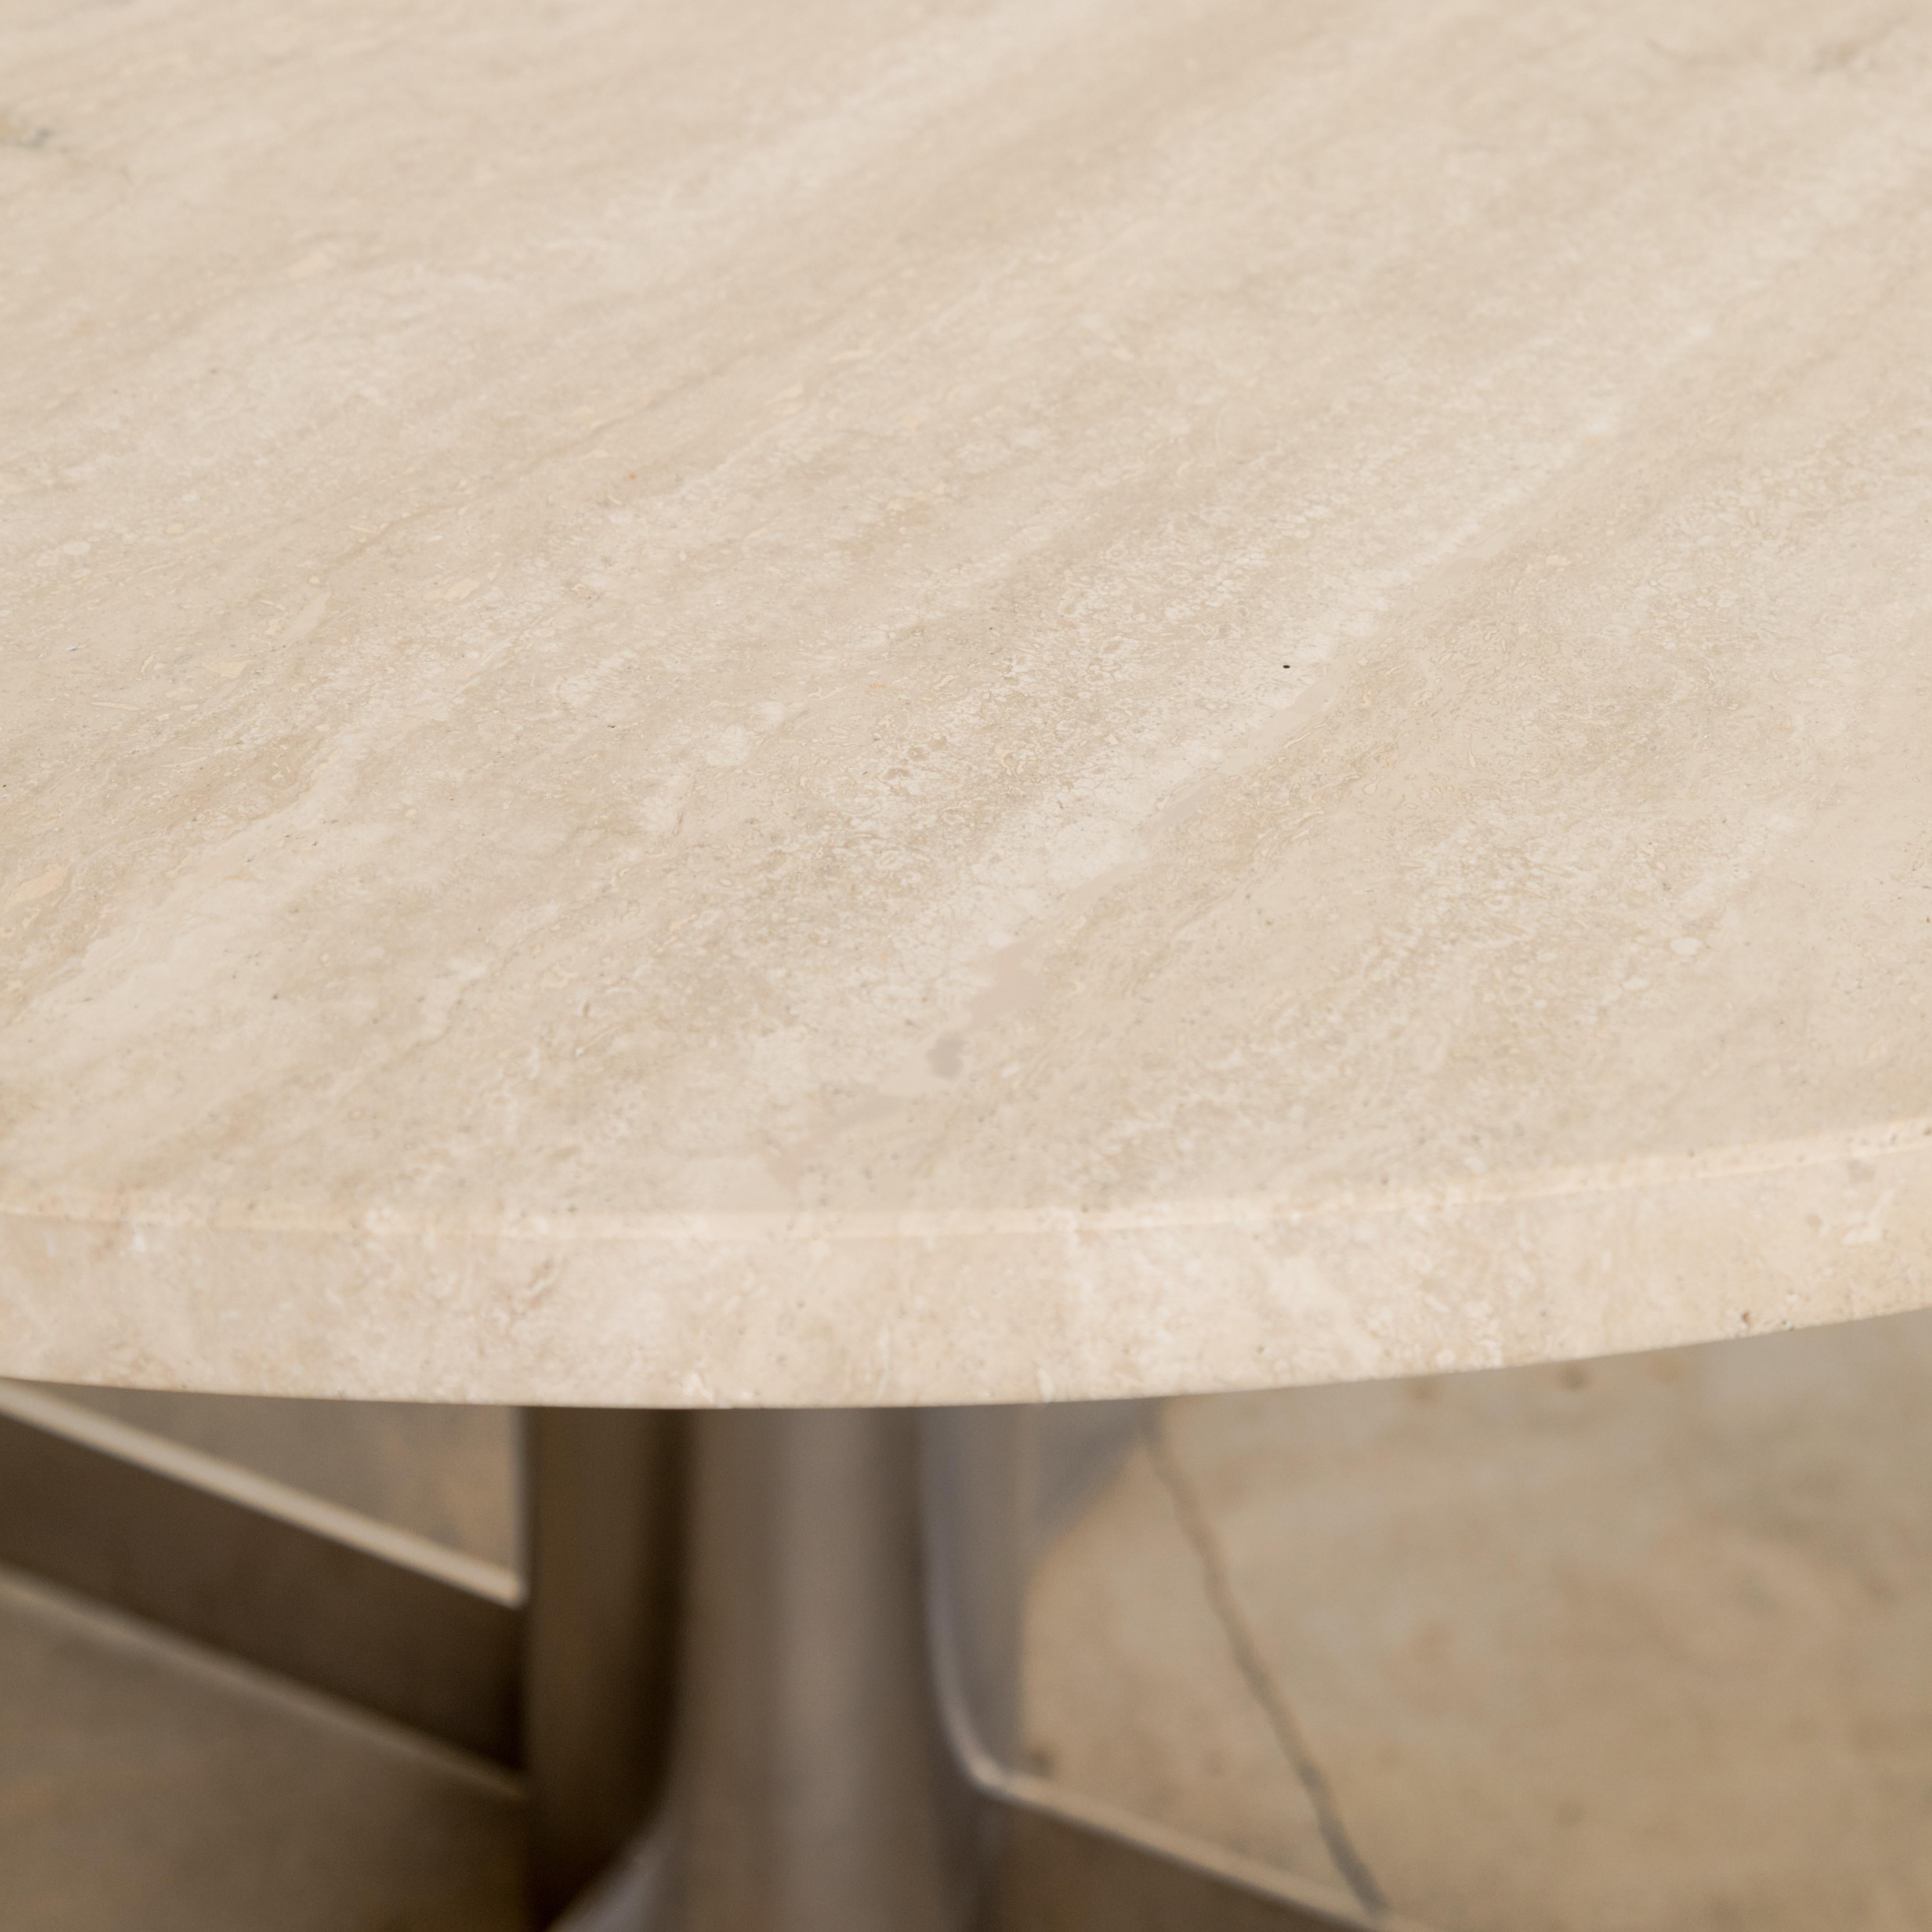 Late 20th Century Travertine + Chrome Pedestal Dining Table For Sale